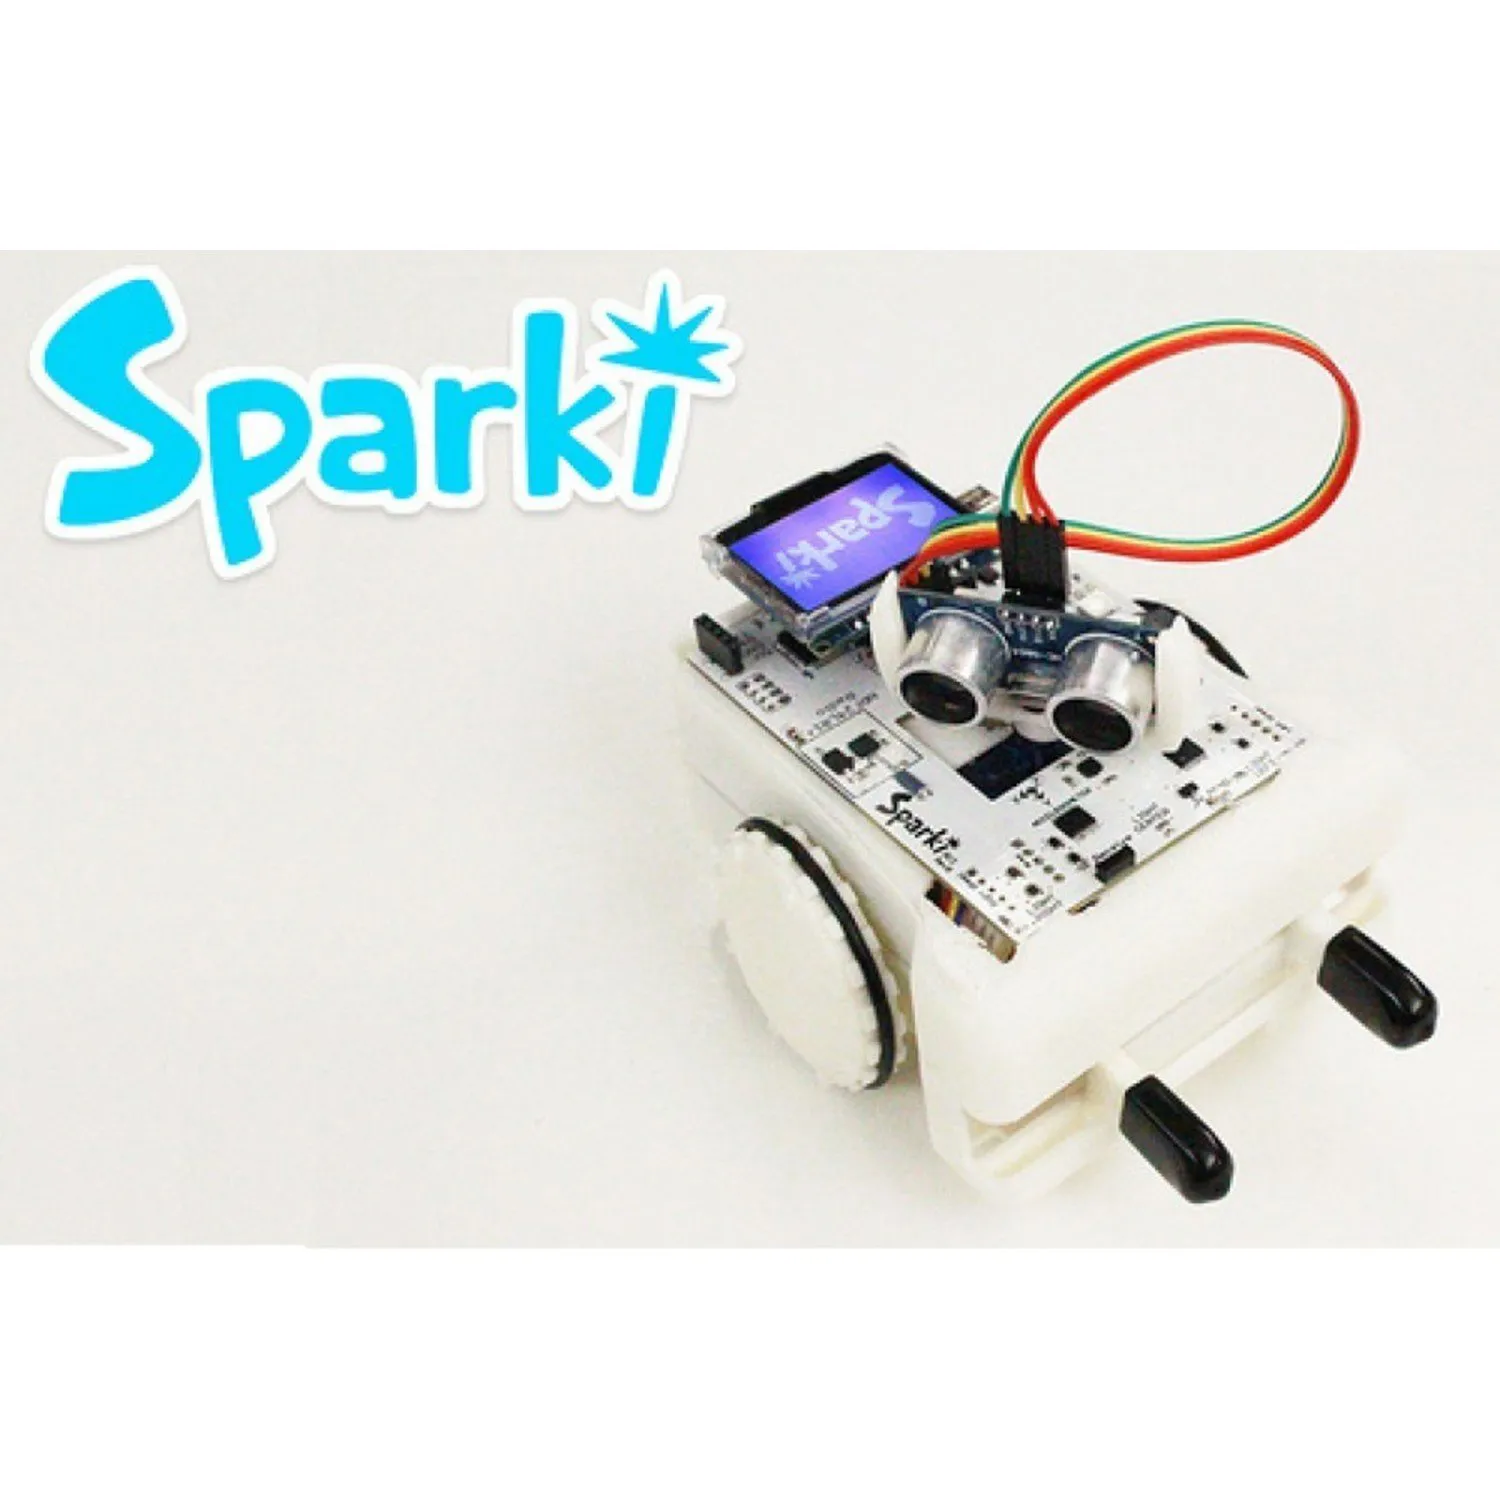 Photo of Sparki Robot - the easy robot for everyone